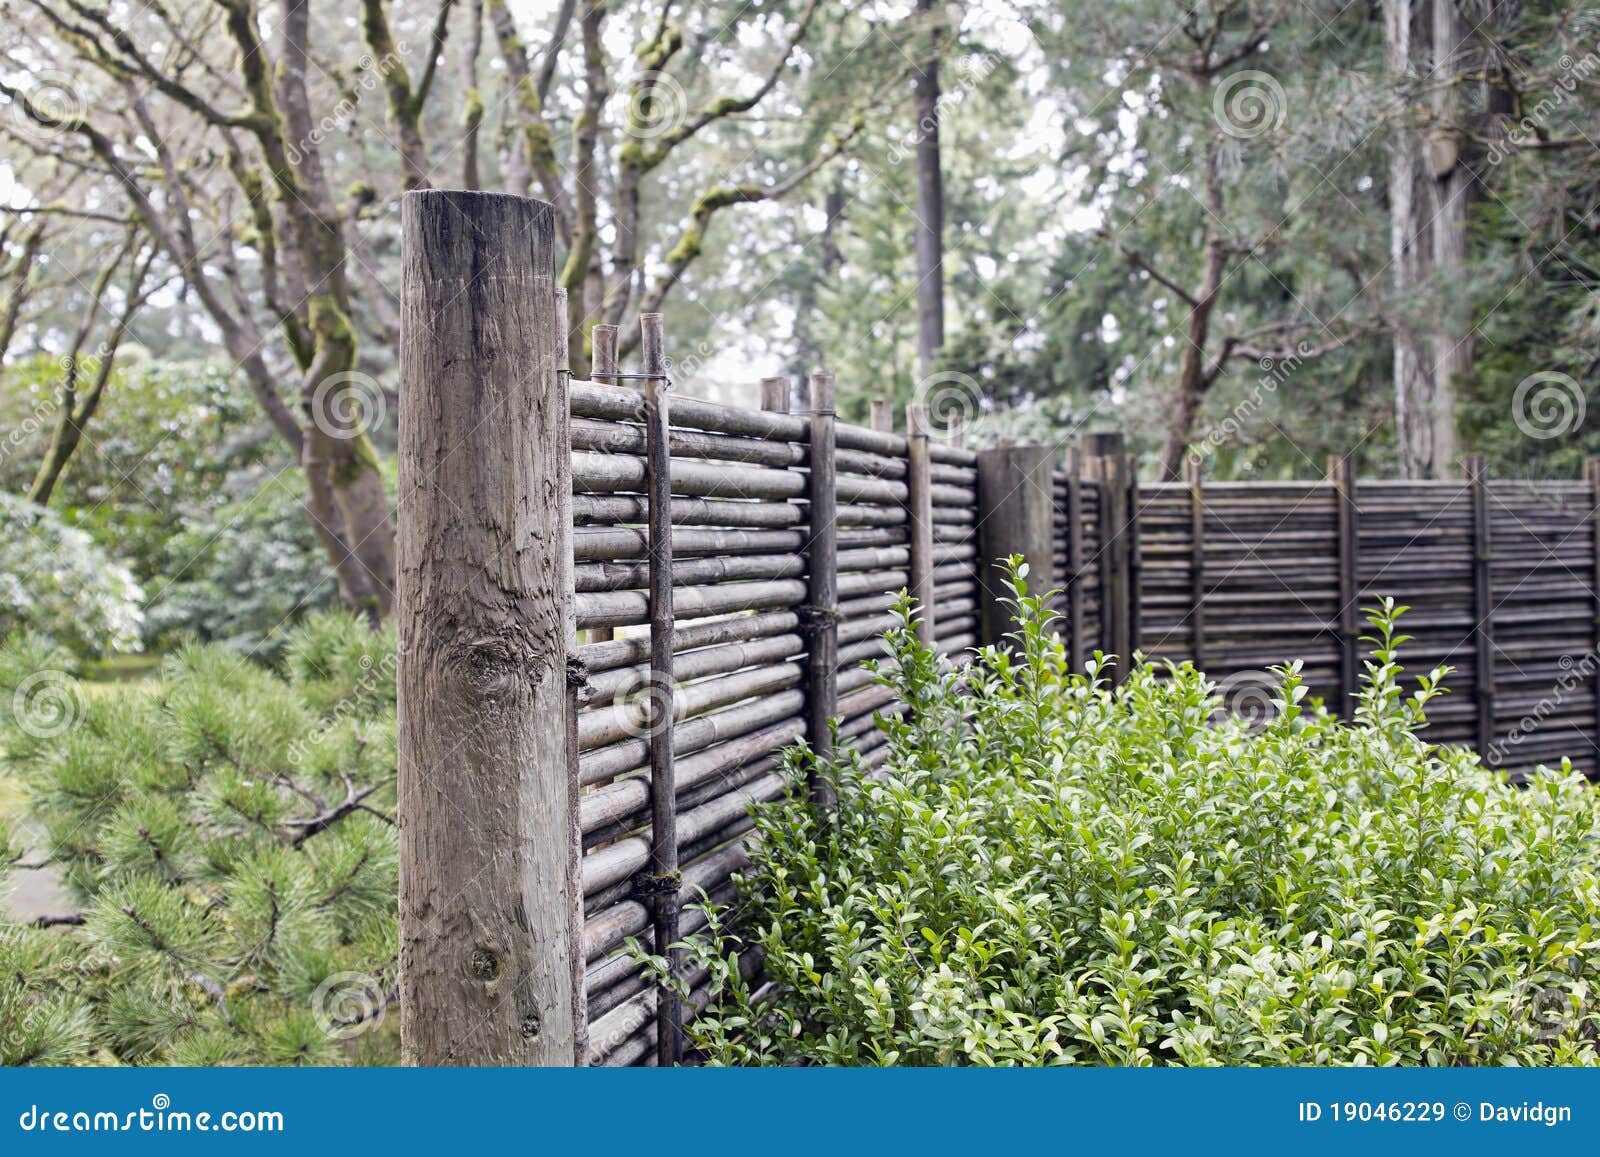 Wood And Bamboo Fencing At Japanese Garden Stock Image Image Of